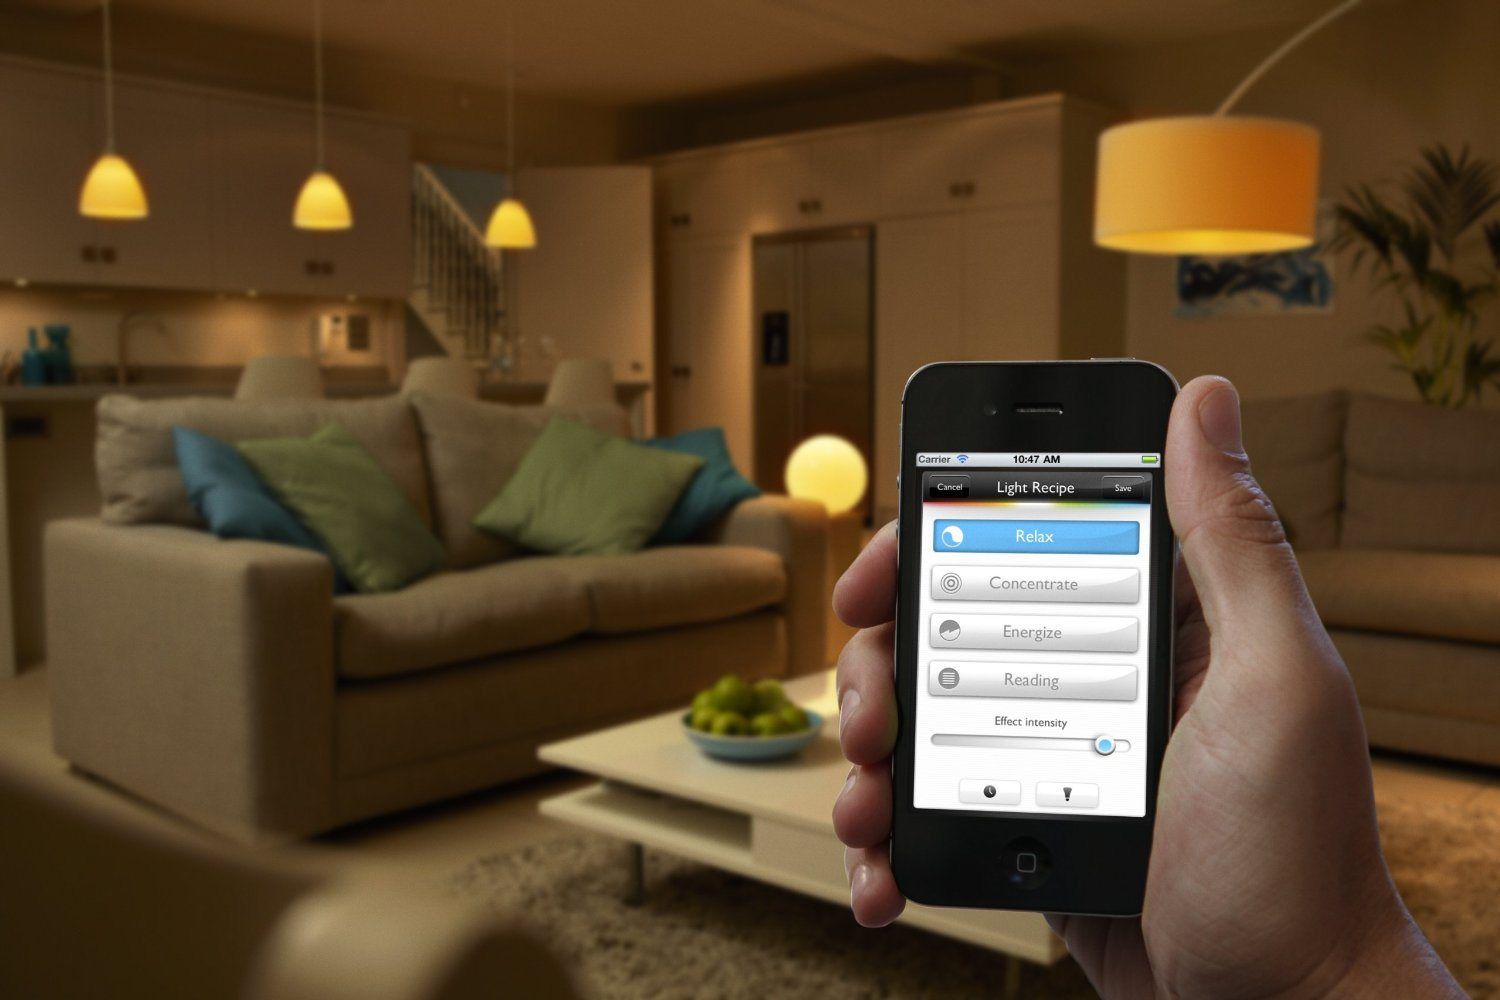 A well-lit living room with light control by a smartphone, capturing the essence of modern technology and home comfort